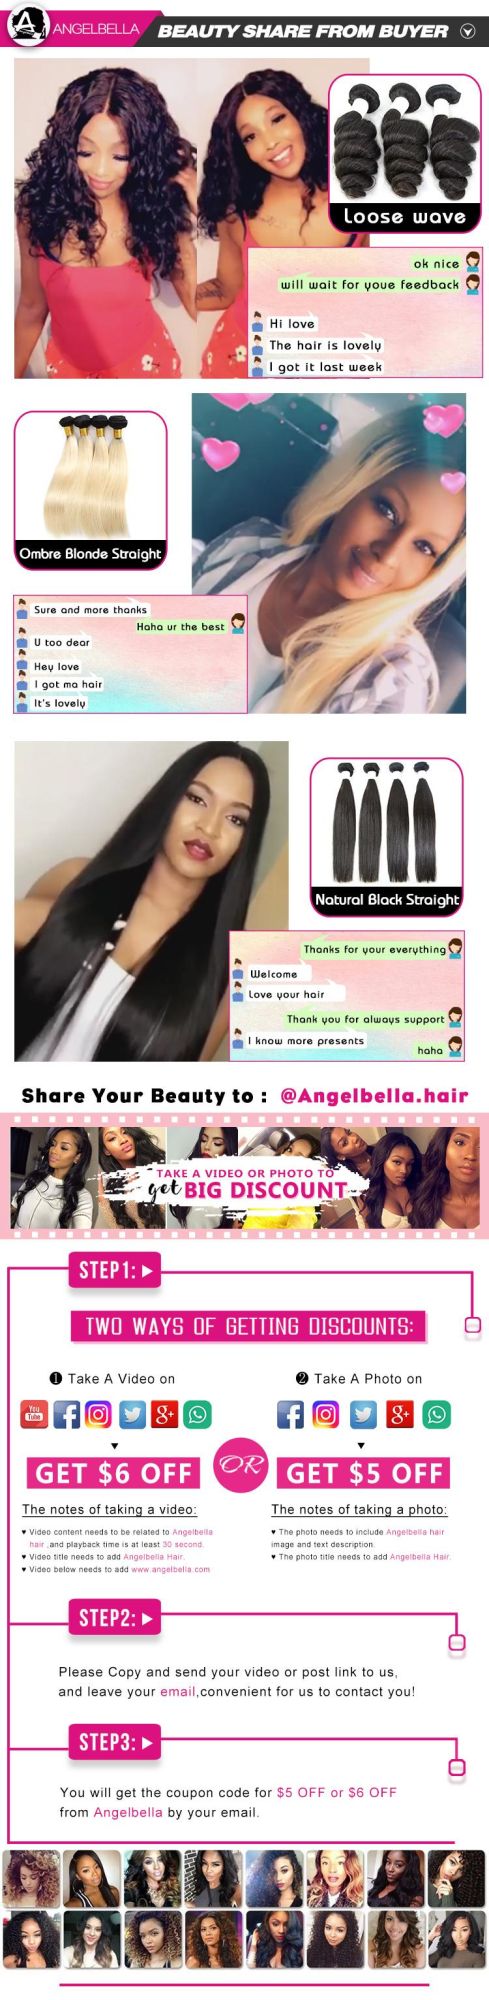 Angelbella New Arrival Virgin Hair Frontal Natural Wave Lace Frontal with Baby Hair